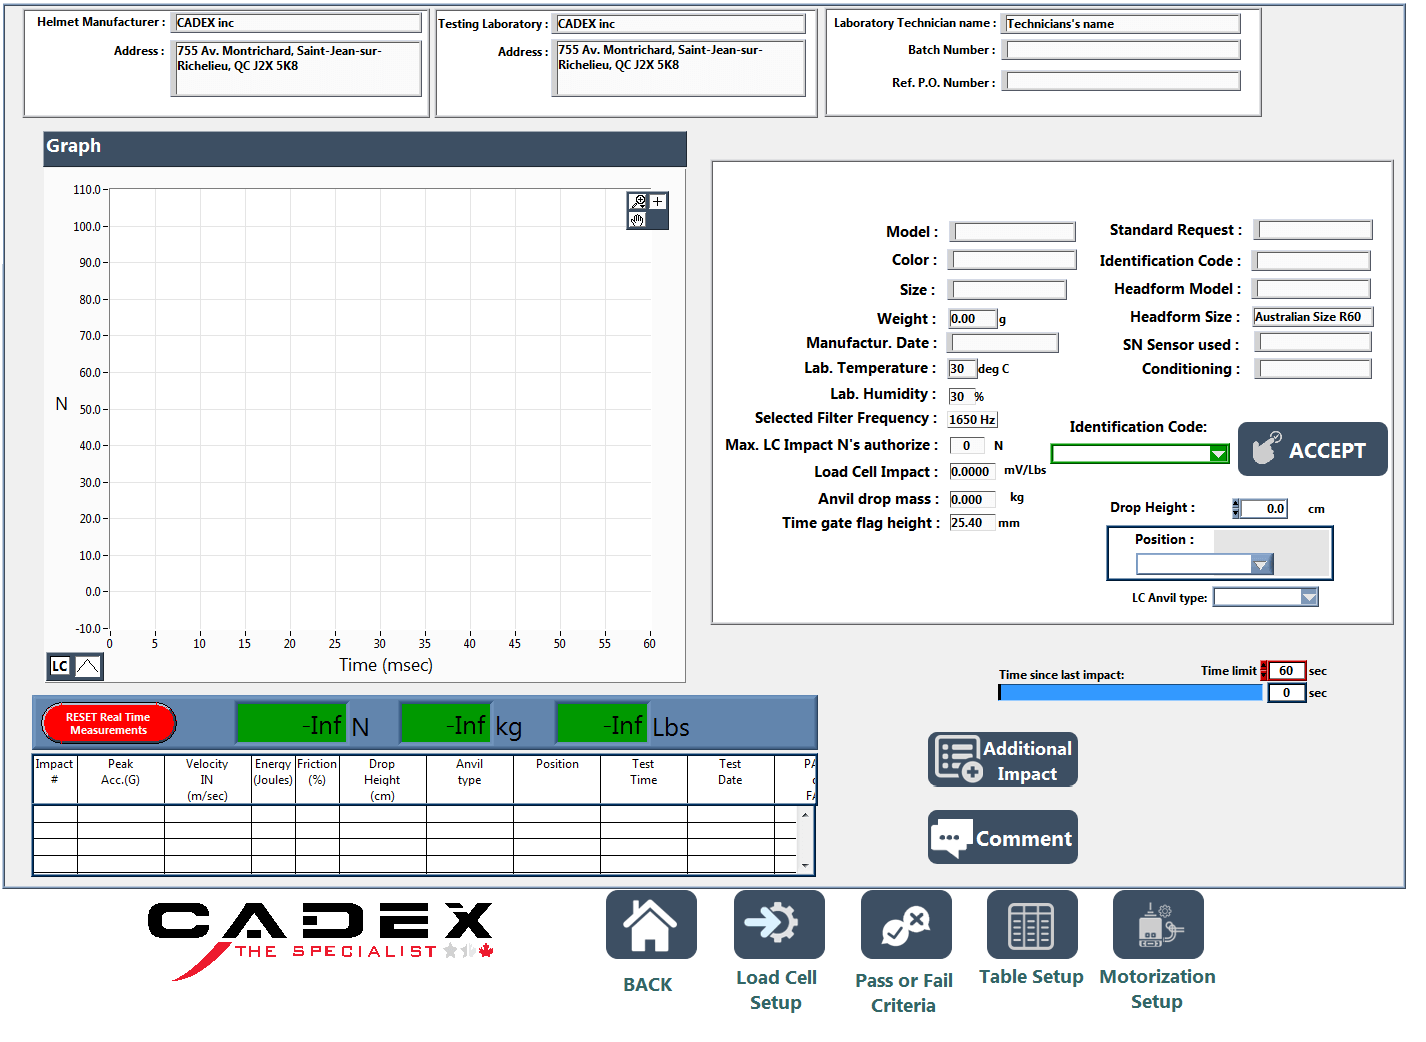 Compatible with Cadex Software.